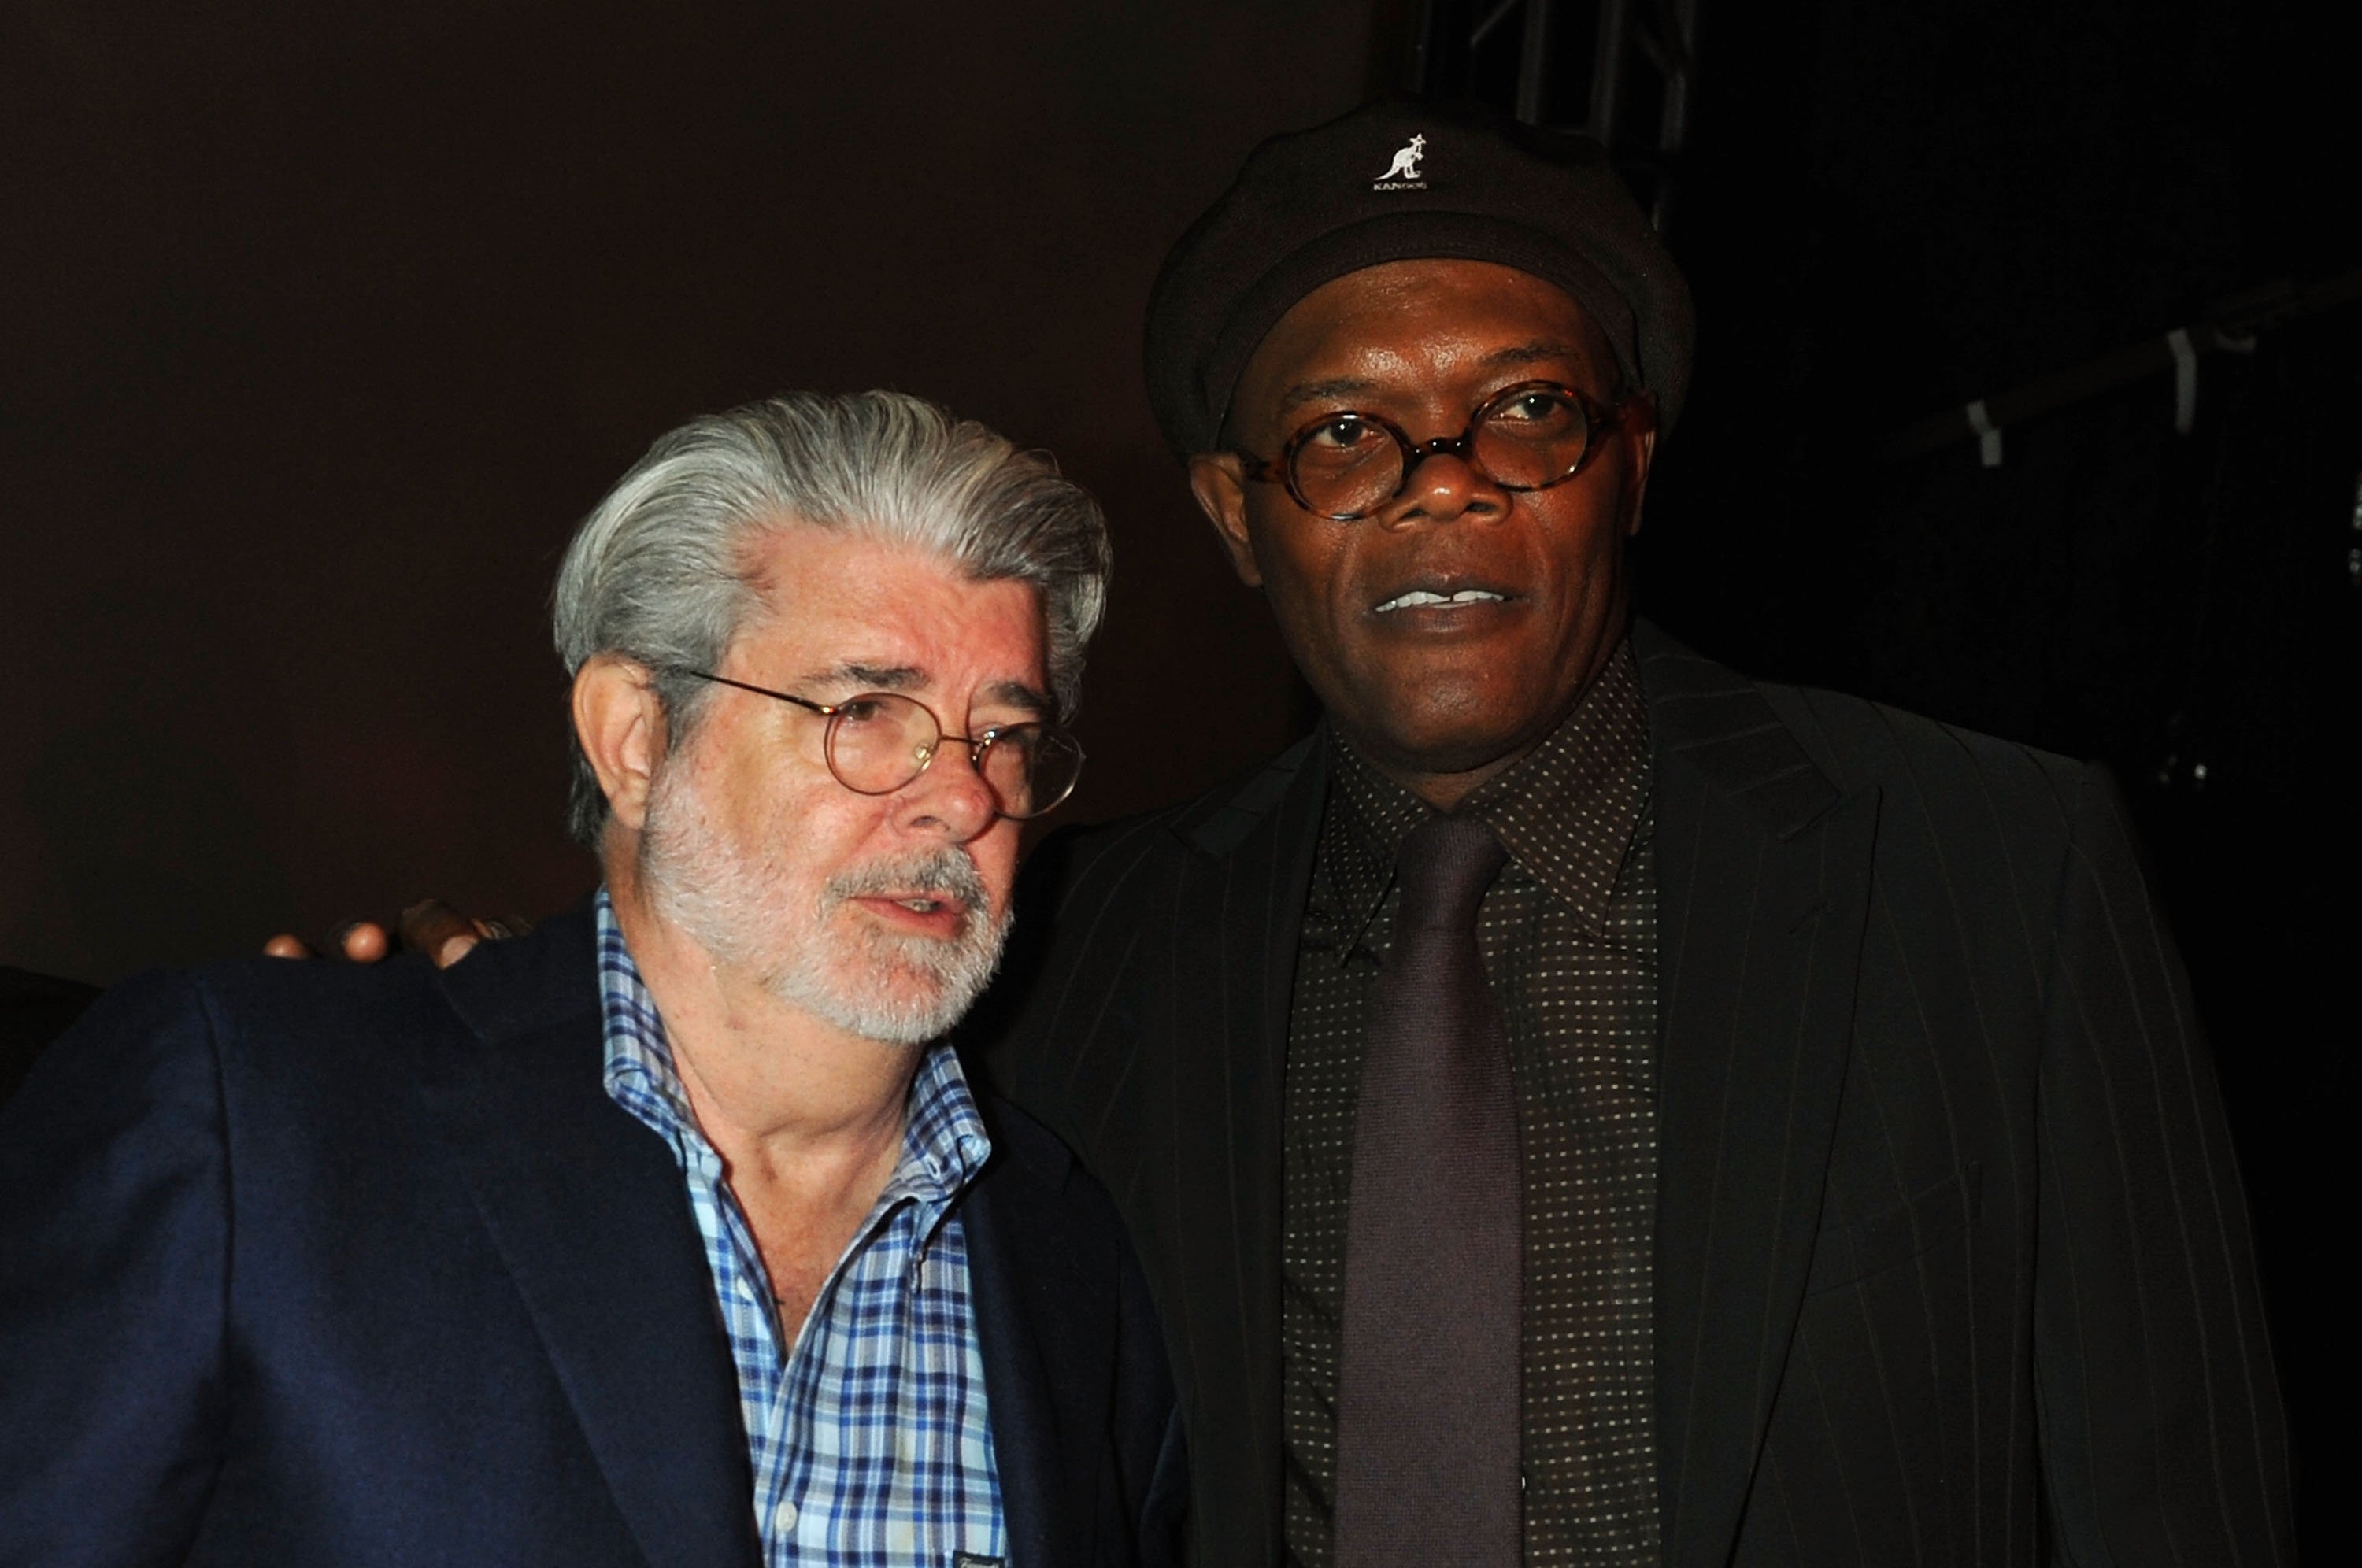 George Lucas and Samuel L. Jackson, who debated over Mace Windu’s lightsaber in ‘Star Wars,’ stand next to each other at Spike TV's Scream awards in 2008.